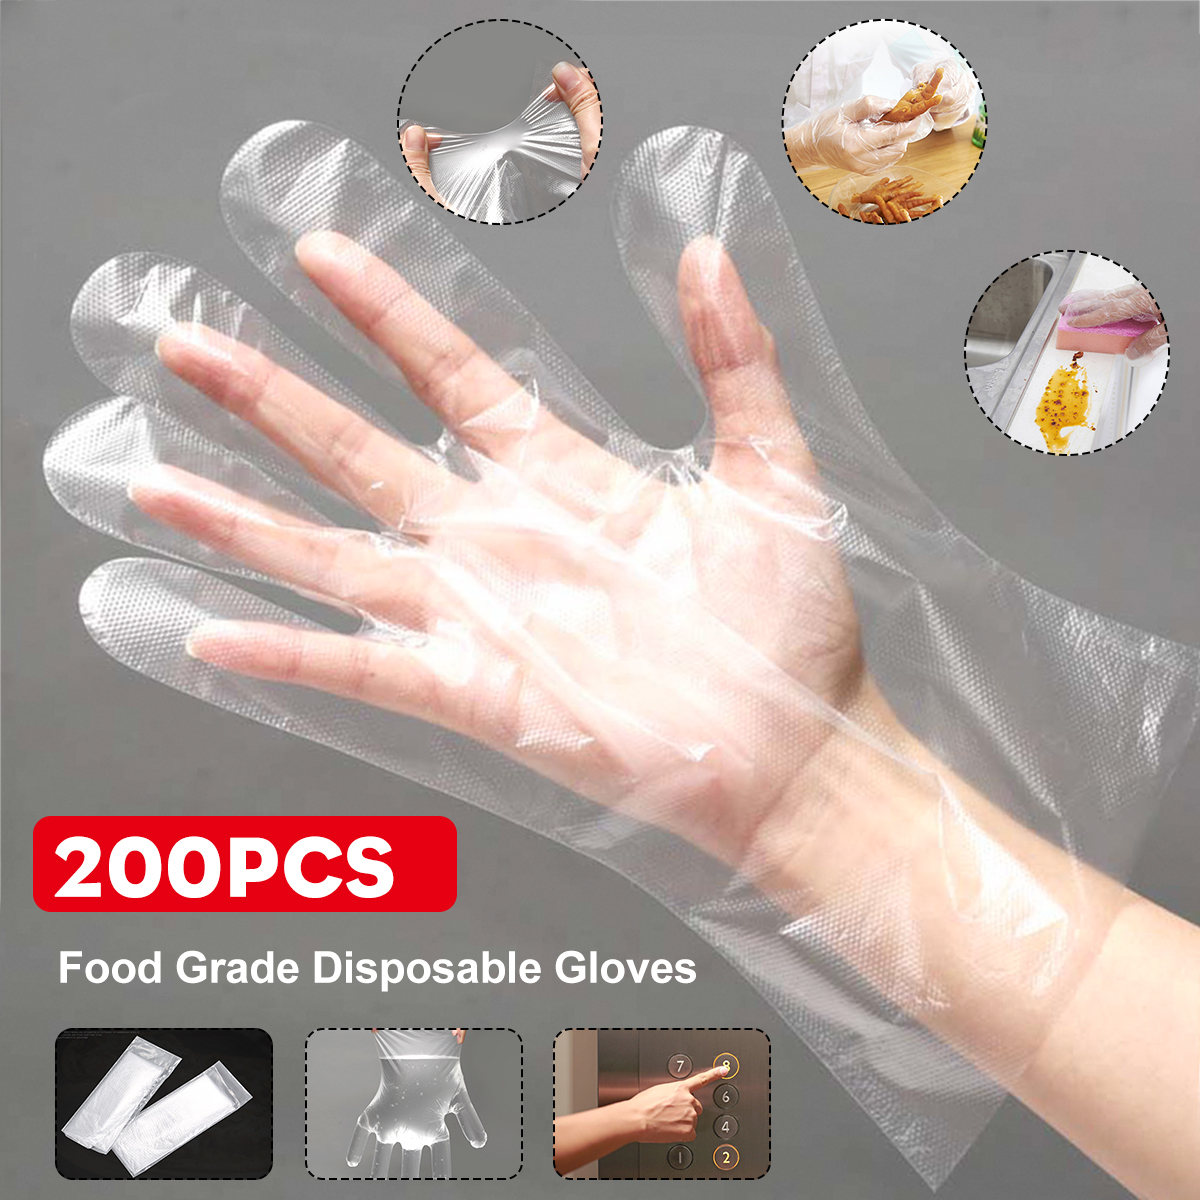 100PCS-Food-Grade-Disposable-Vinyl-Gloves-Anti-static-Plastic-Gloves-Home-Outdoor-Hiking-Camping-Glo-1657491-1